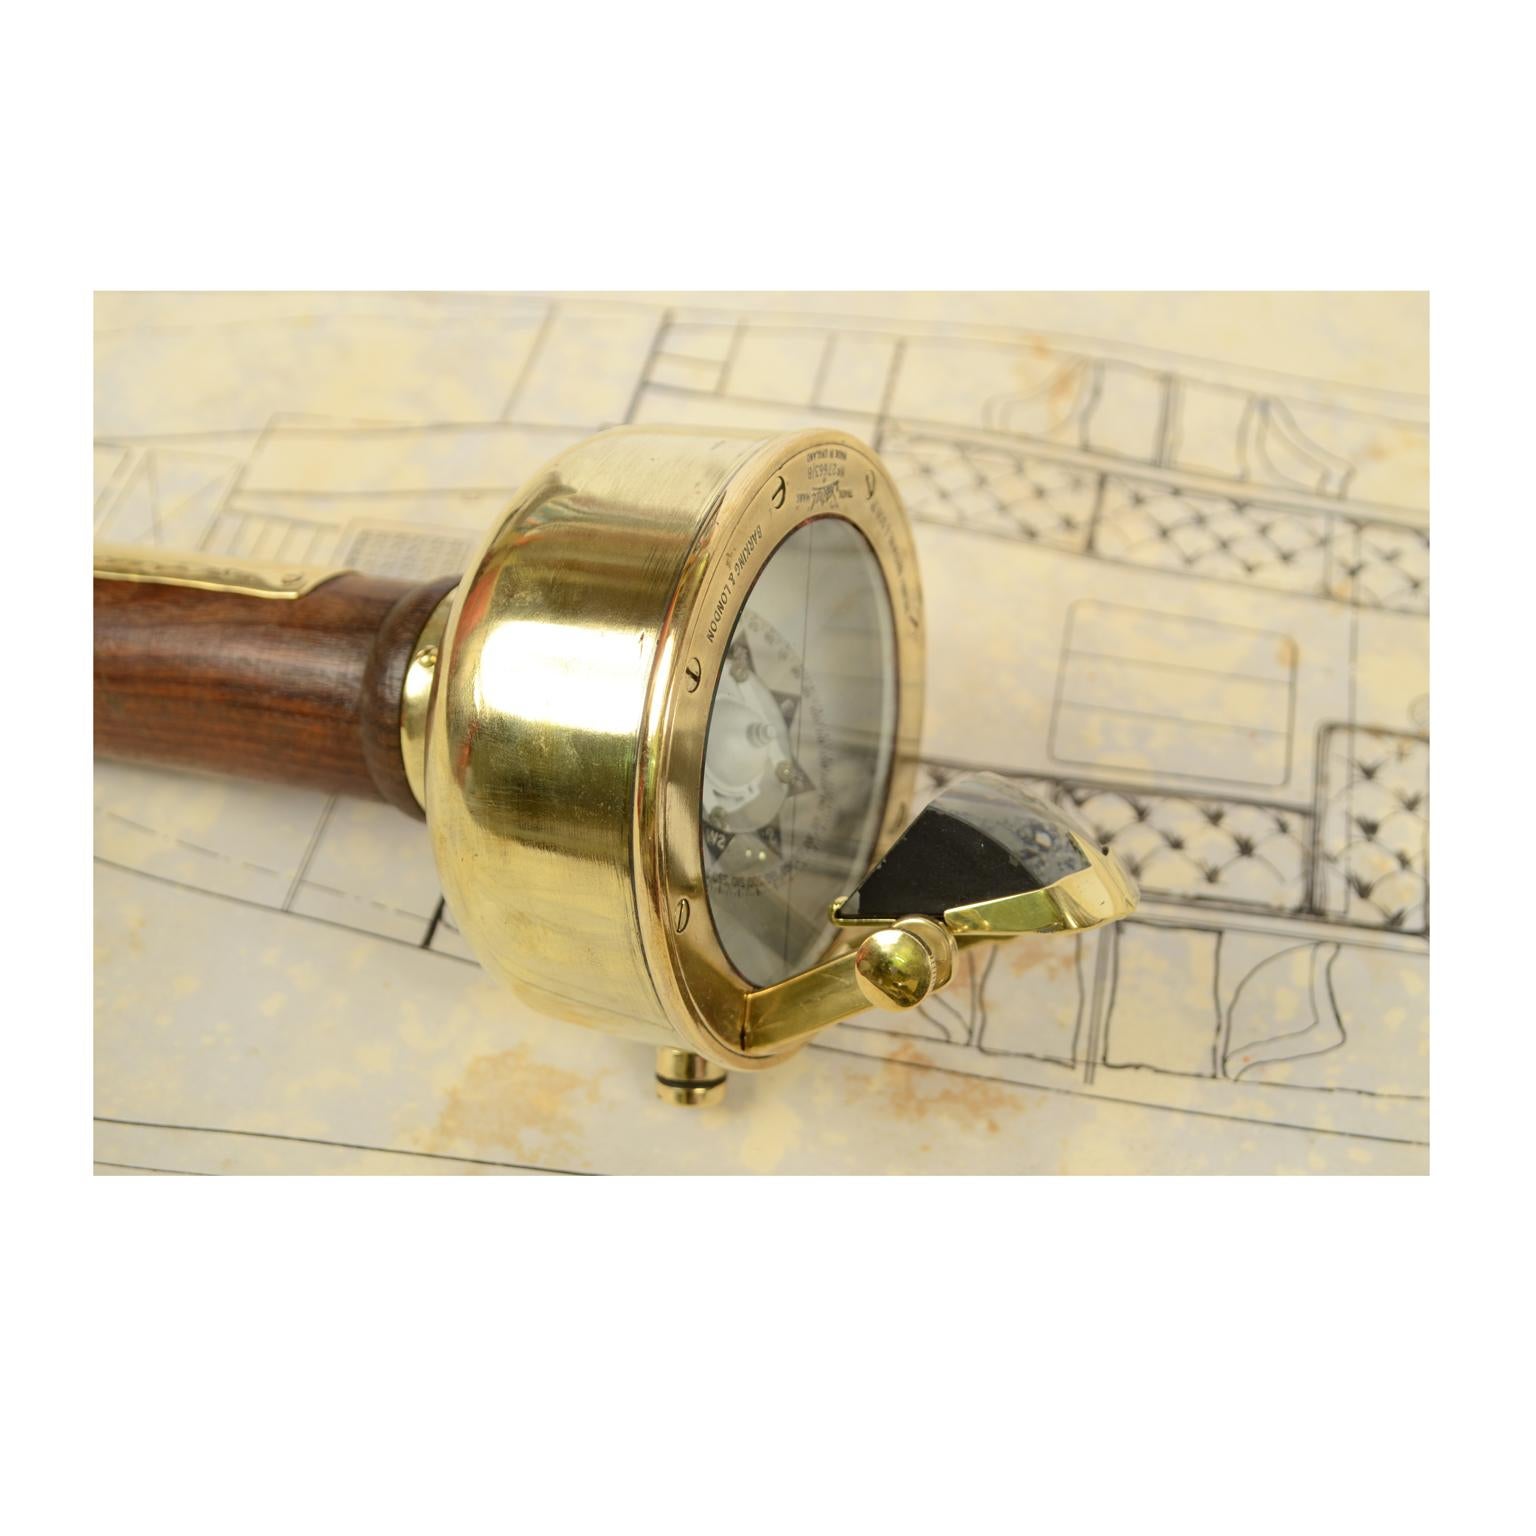 Sestrel Compass Late 19th Century, Brass and Wood Support base made of Brass 5